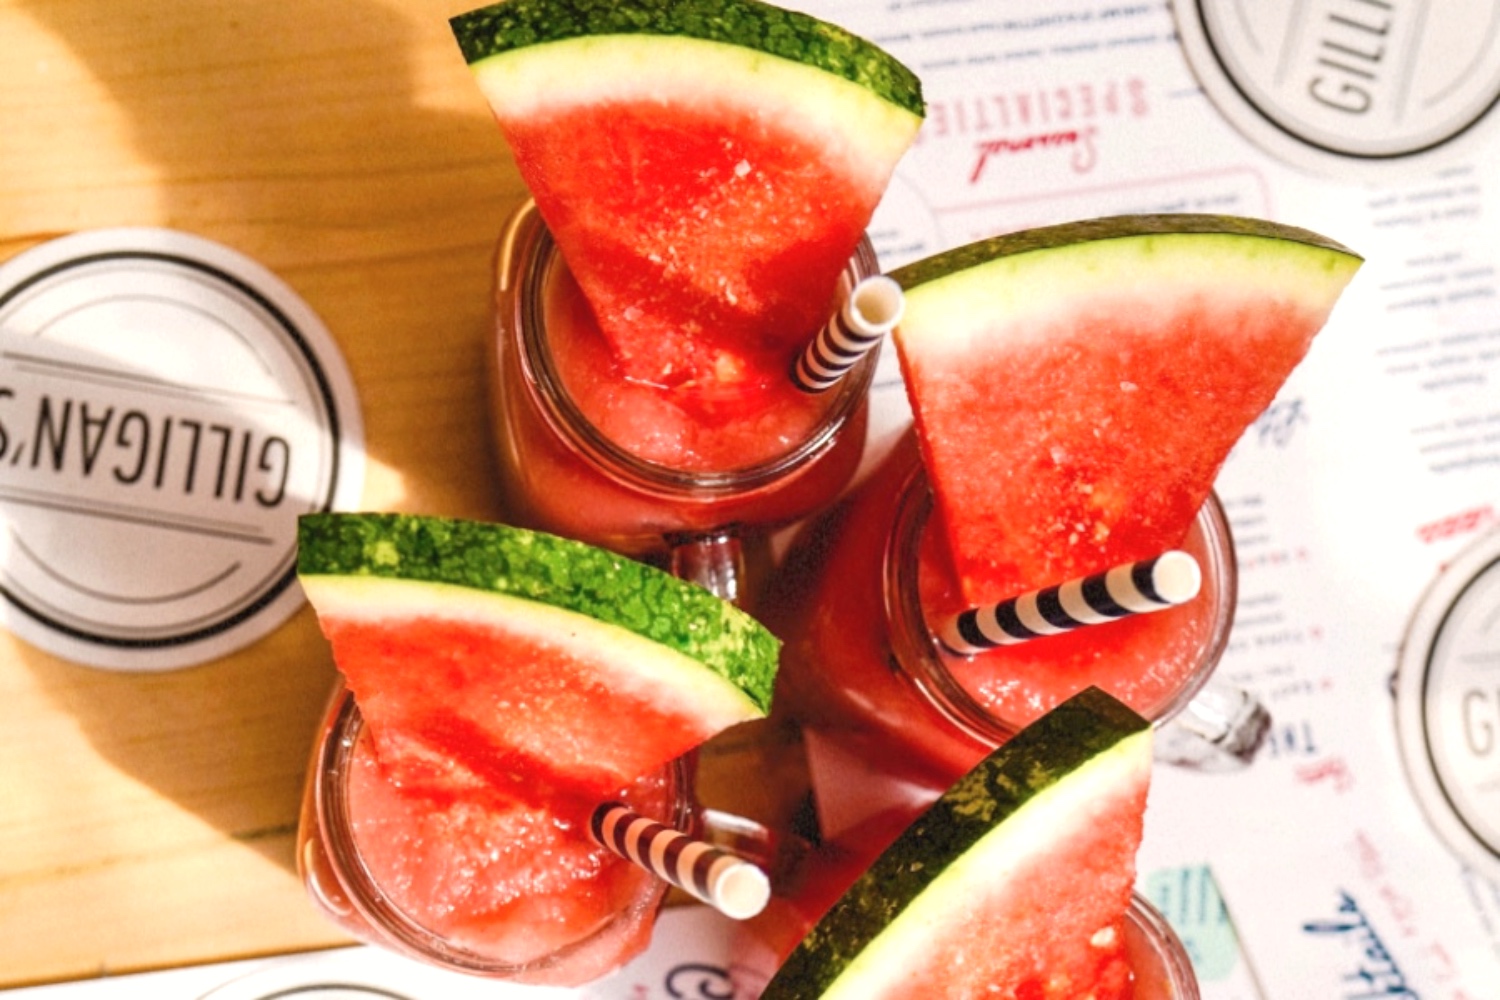 Frozen watermelon margaritas at Gilligan's outdoor restaurant and private event space in SoHo, NY.